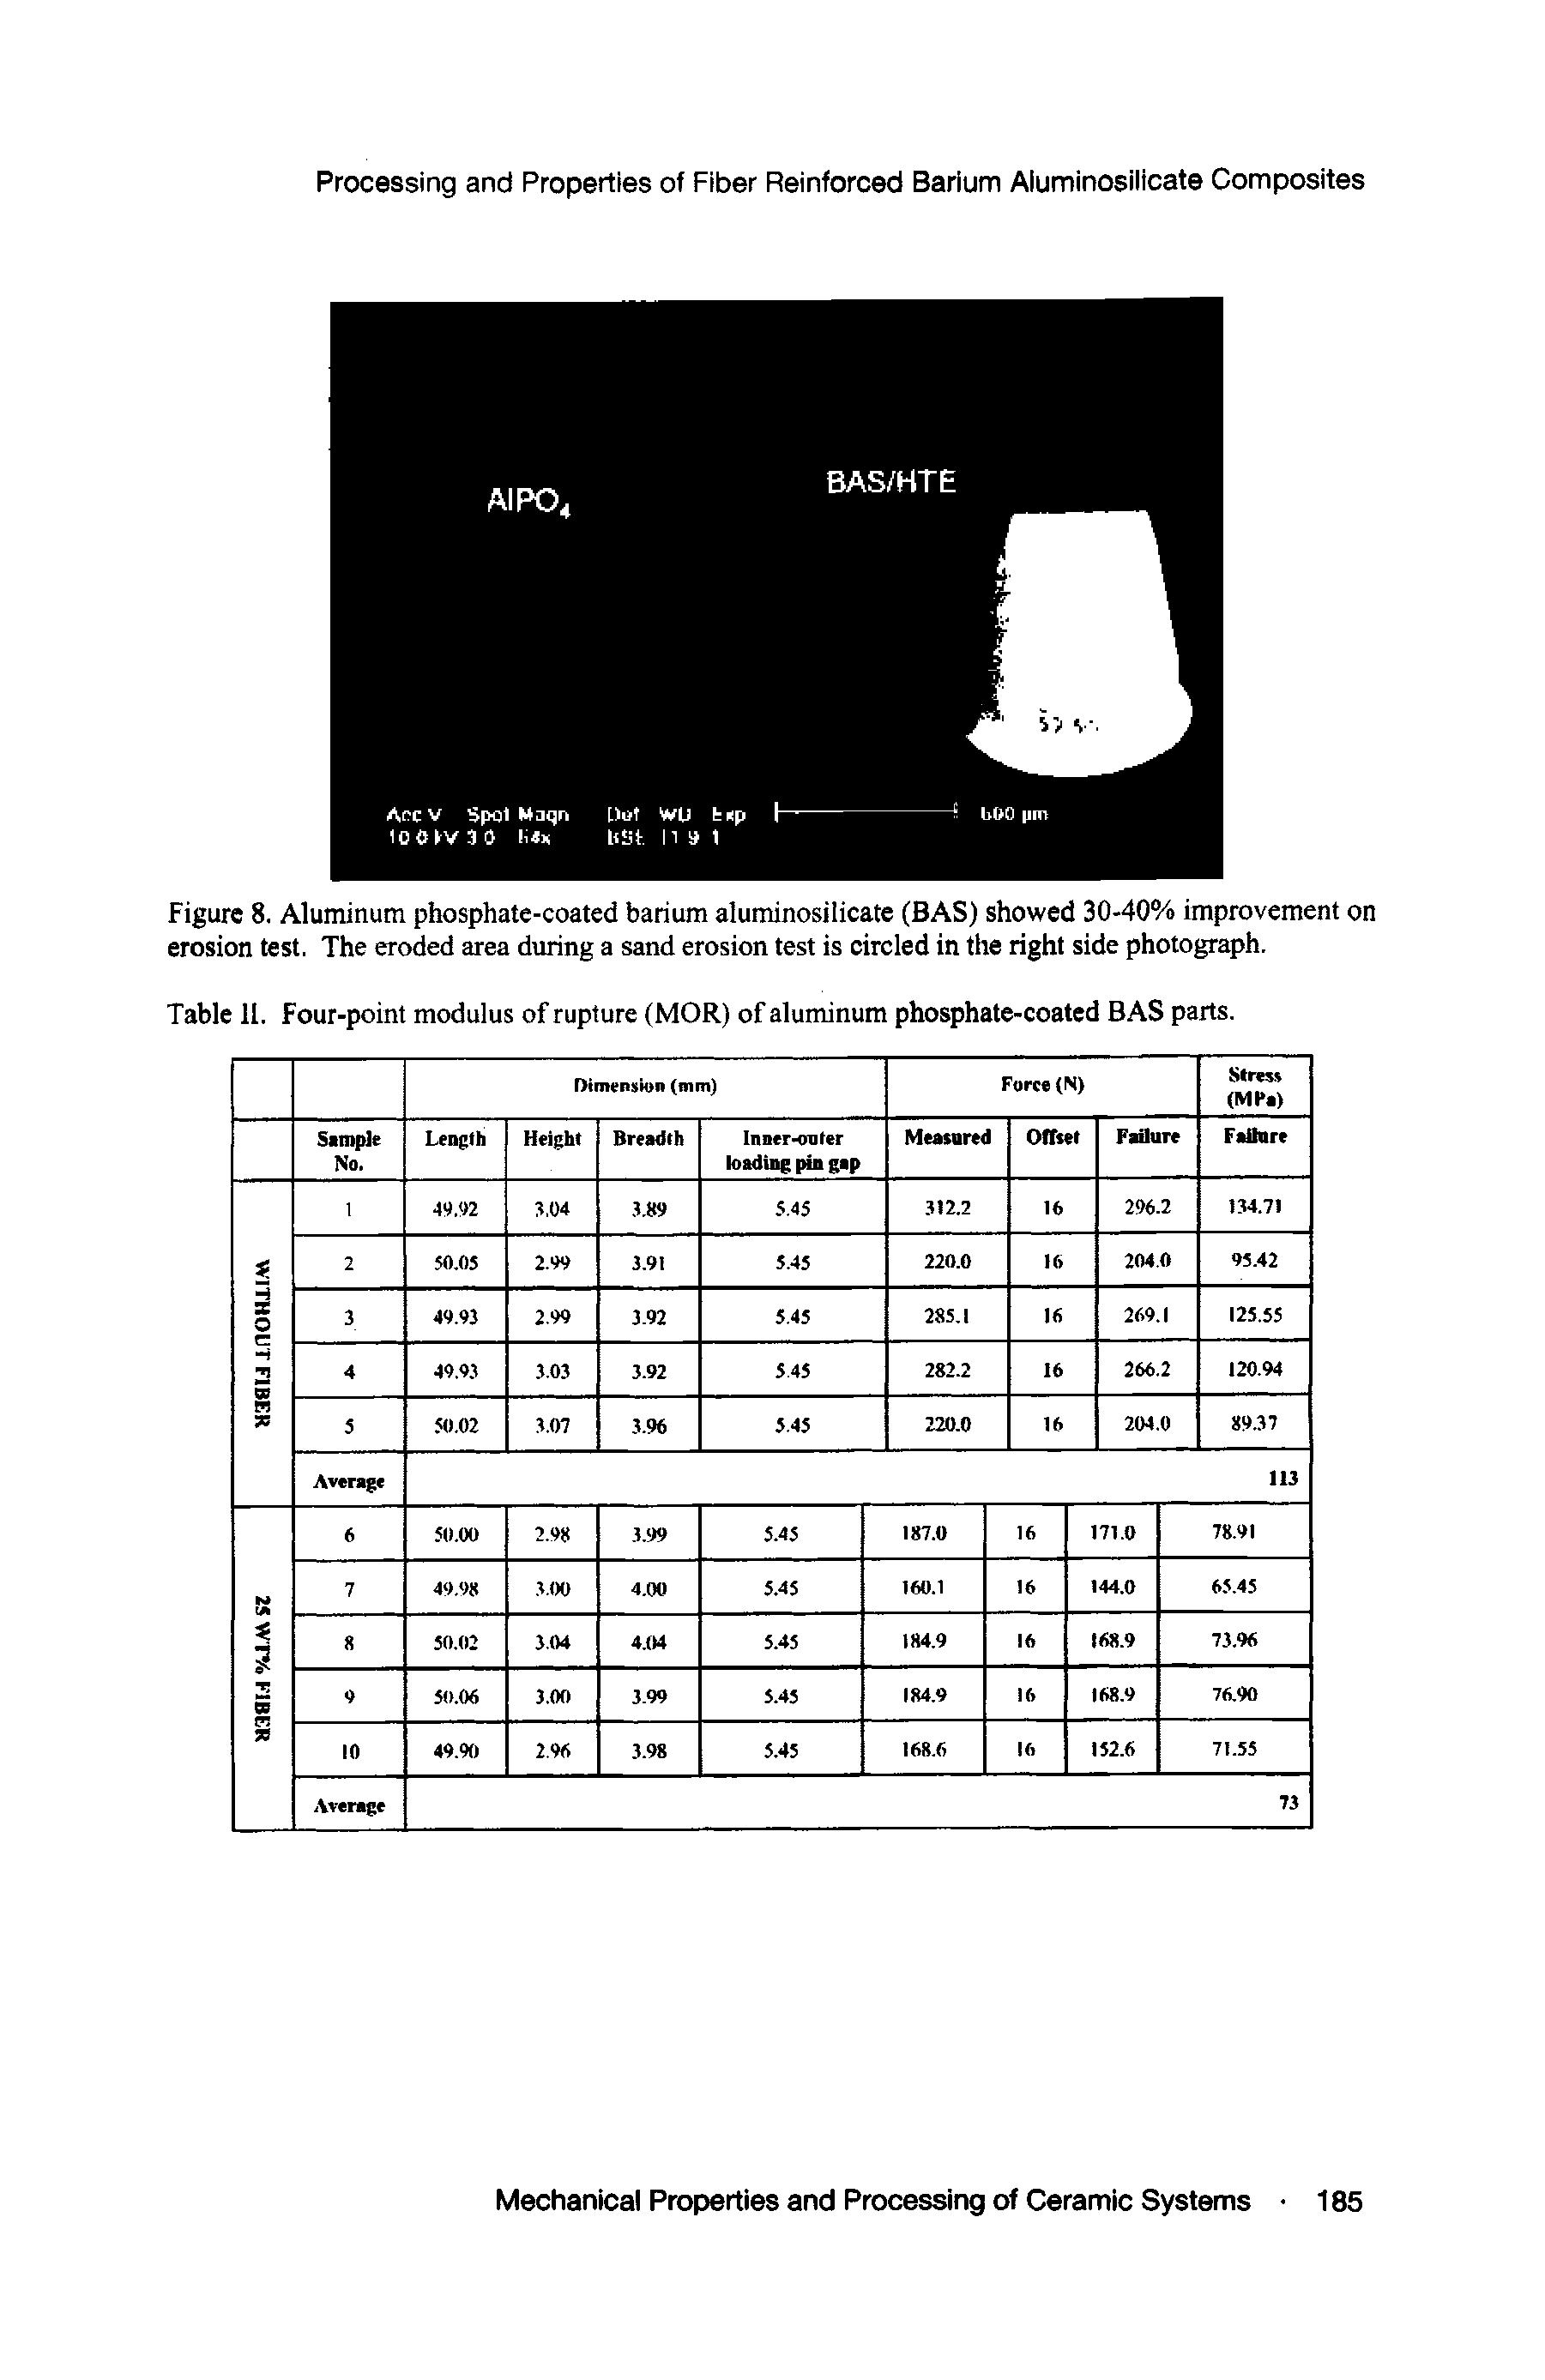 Figure 8. Aluminum phosphate-coated barium aluminosilicate (BAS) showed 30-40% improvement on erosion test. The eroded area during a sand erosion test is circled in the right side photograph.